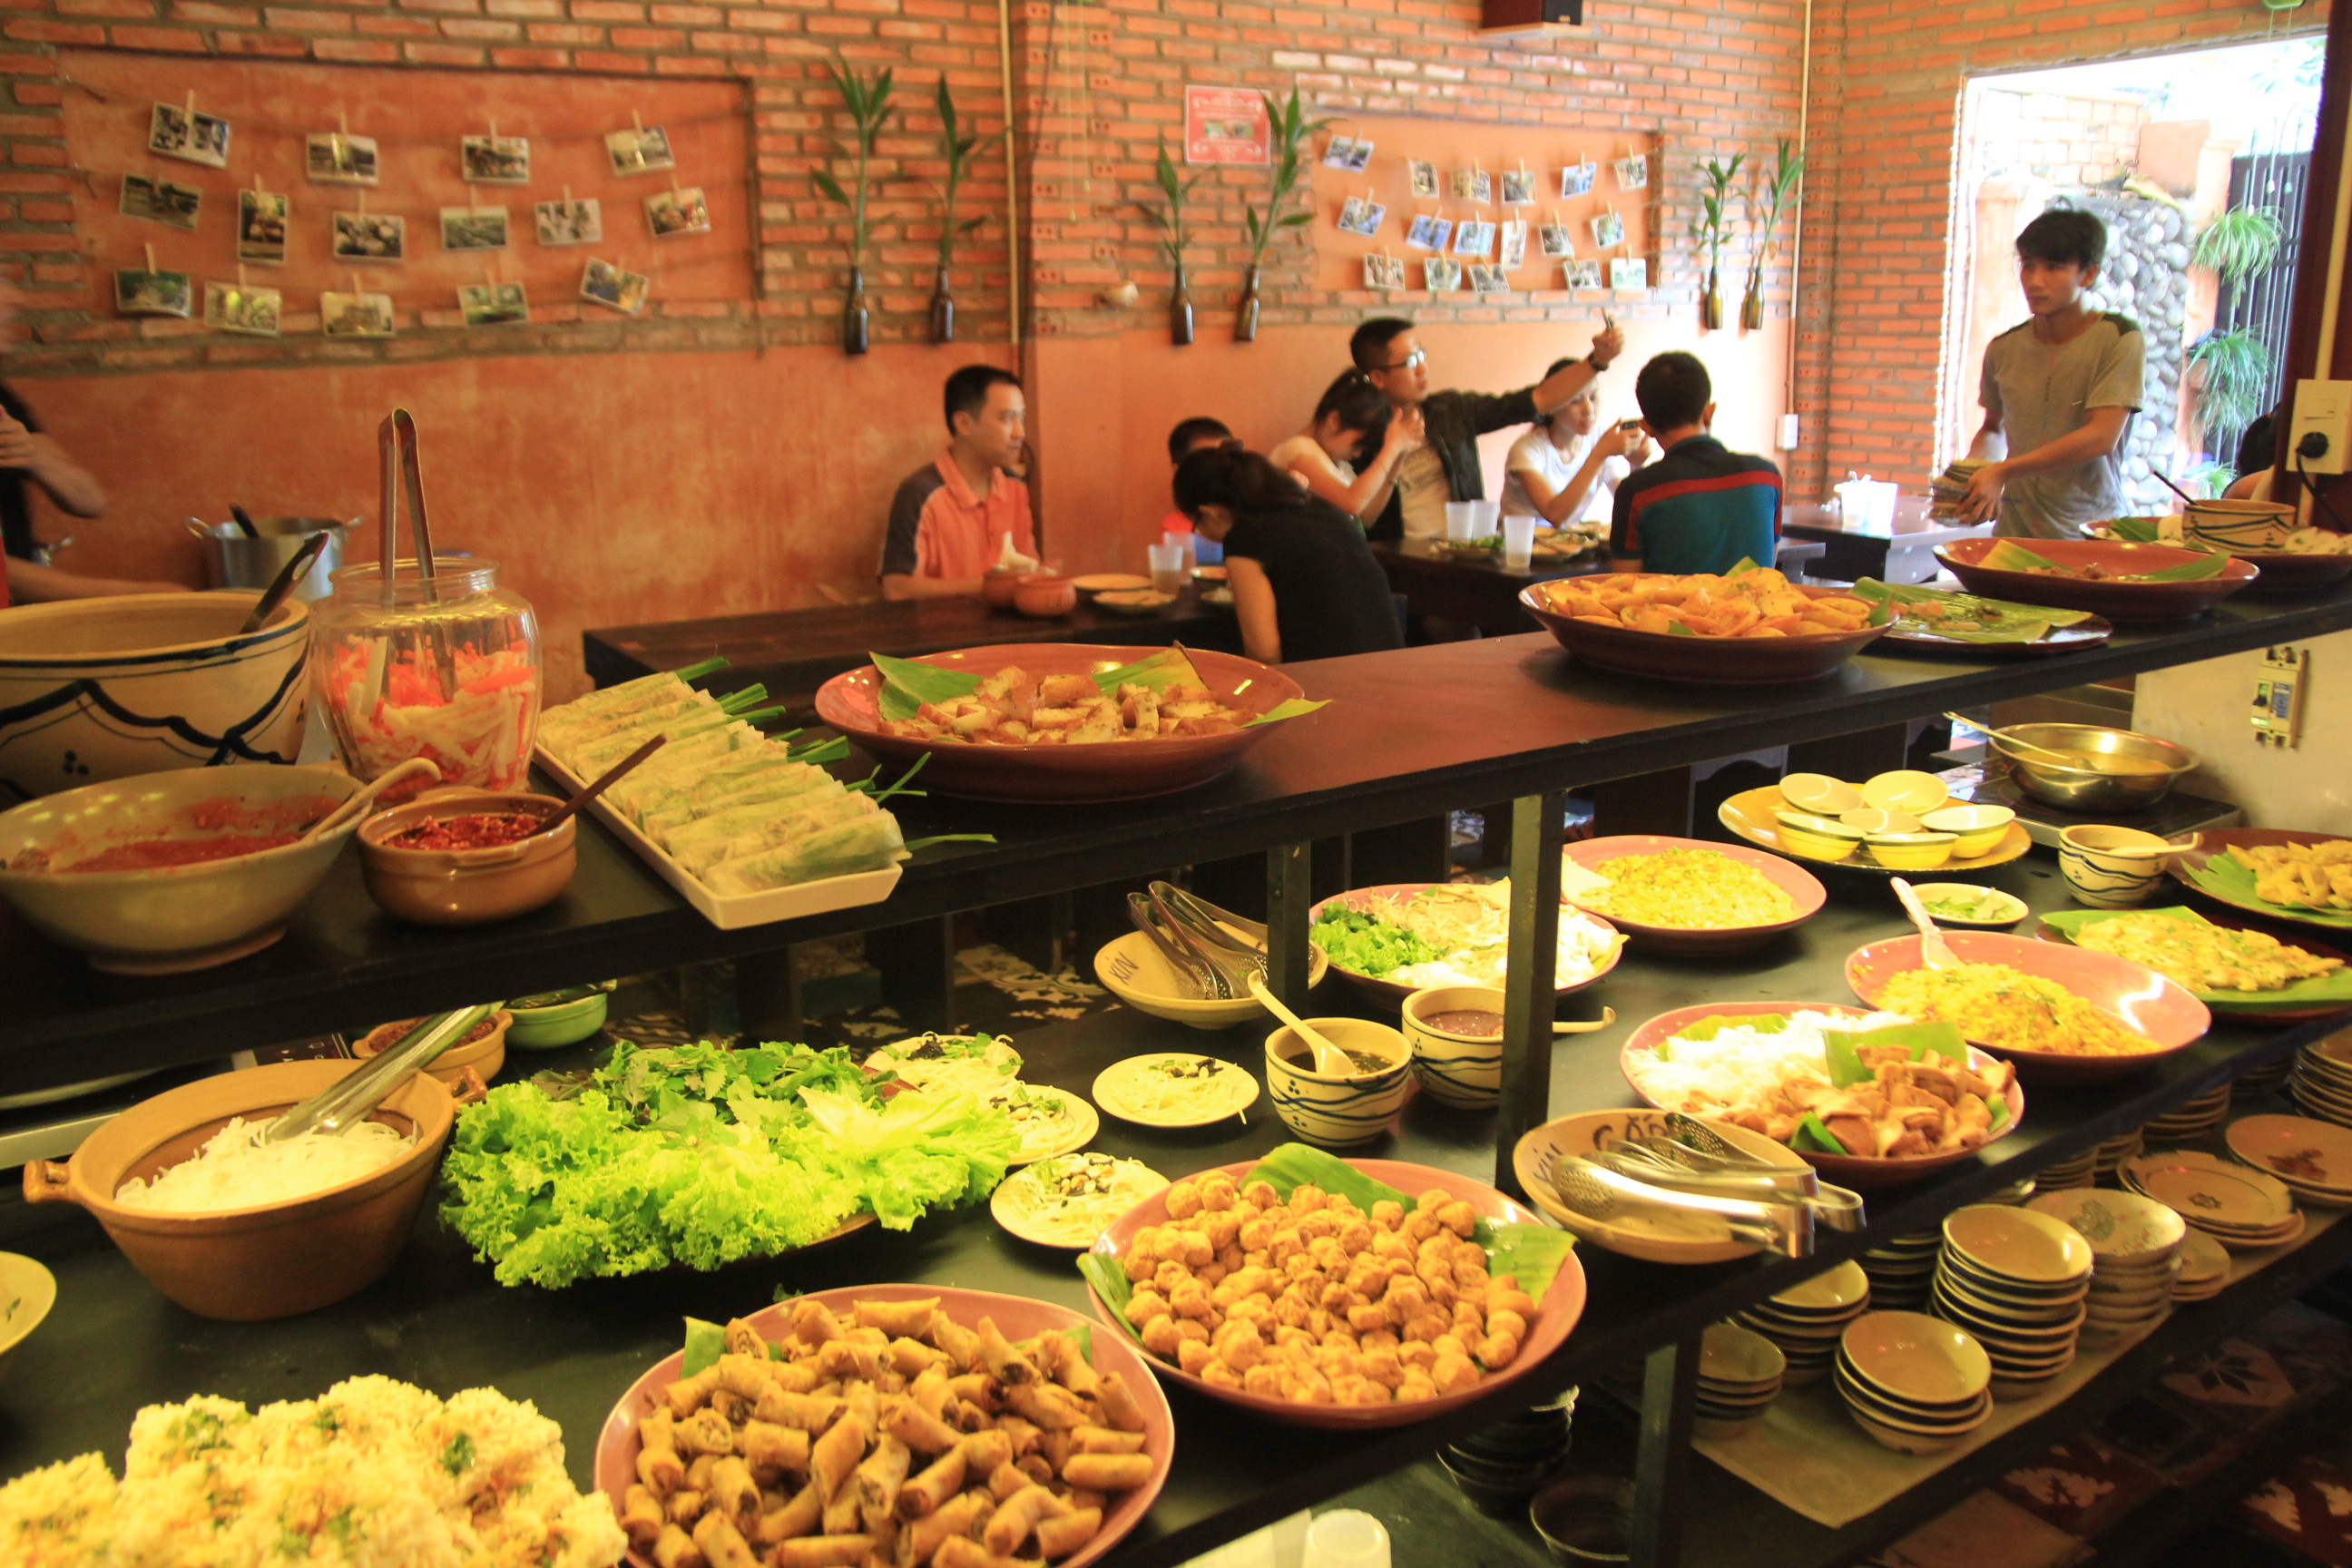 Try these low-cost snack buffets in Hanoi, Ho Chi Minh City